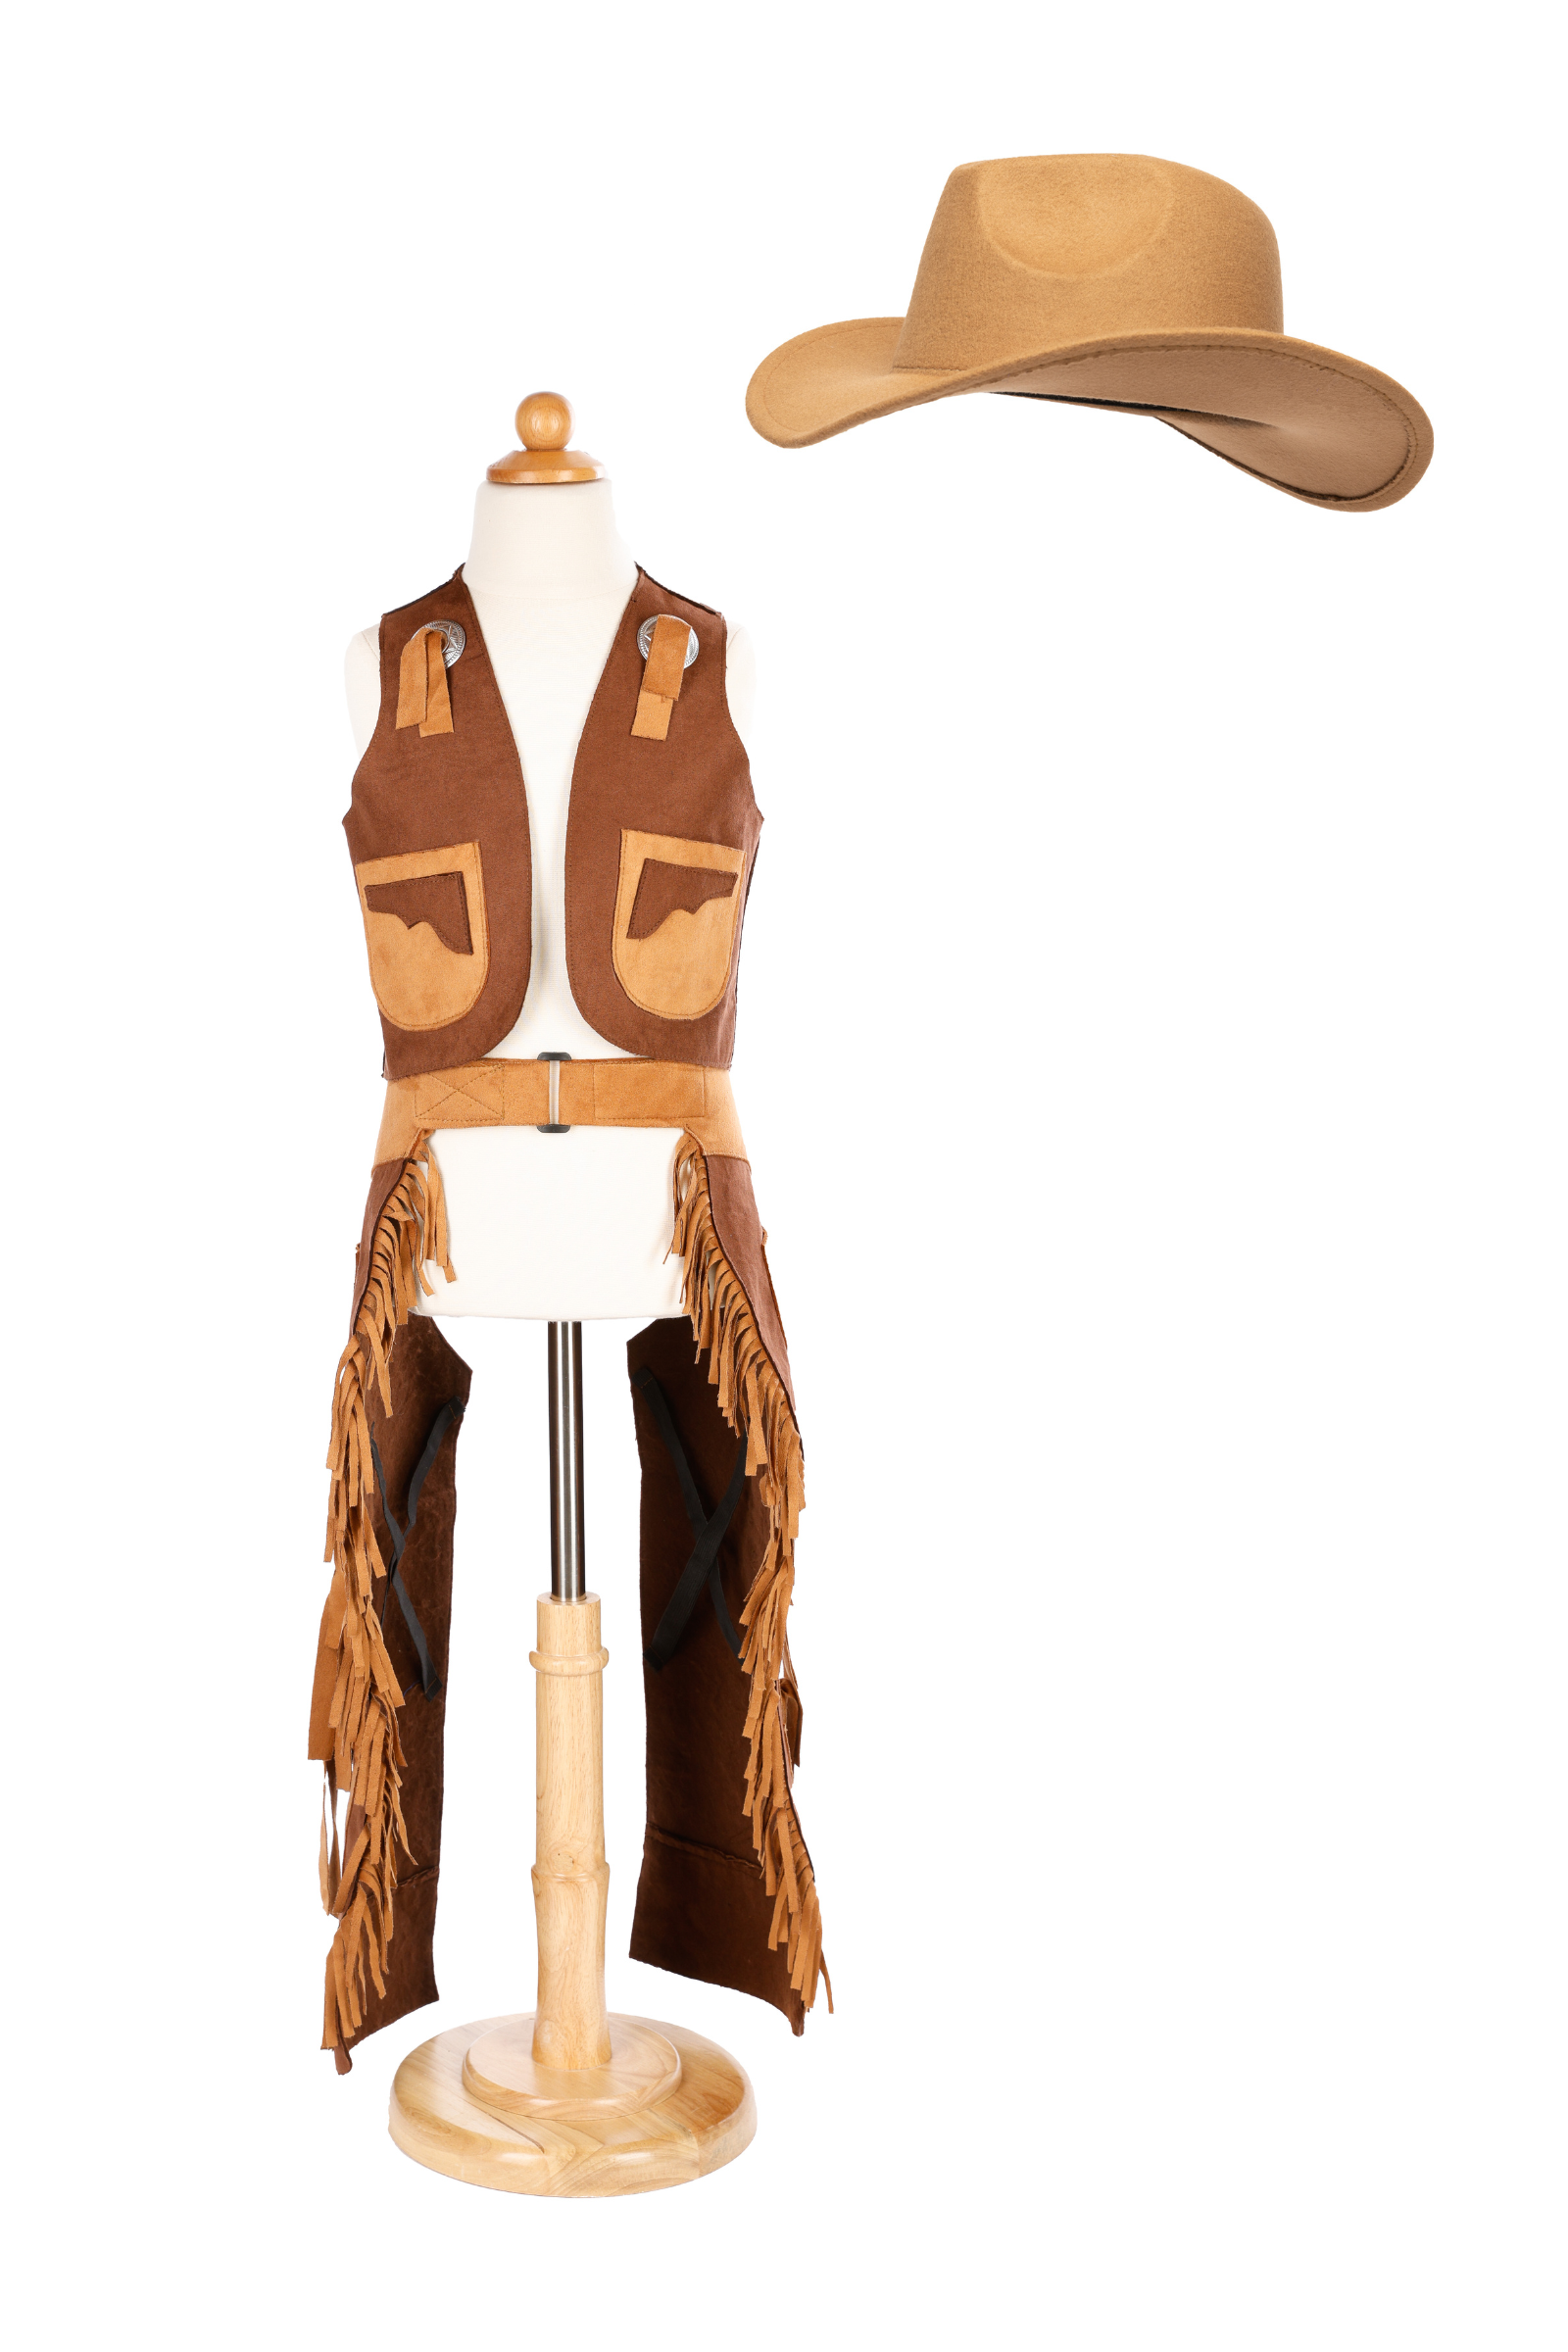 Felt Cowboy Chaps and Vest, Cowboy Outfit, Cowboy Costume for Toddler,  Cowgirl Outfit, Western Costume, Chaps -  Canada